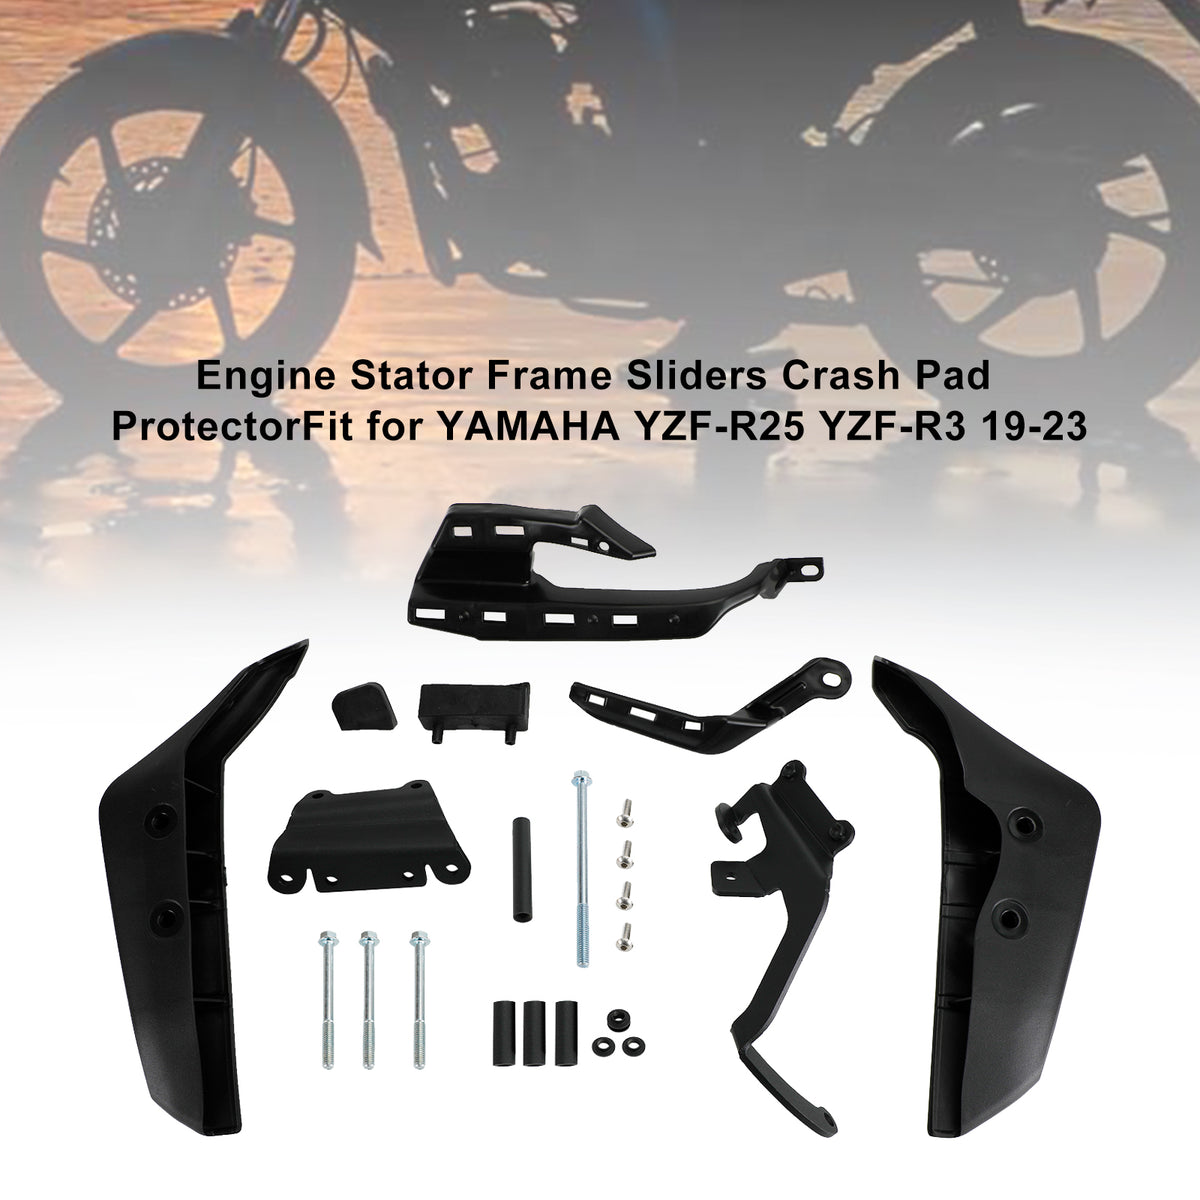 Stator Engine Cover Slider Protector Plastic For Yamaha Yzf-R25 Yzf-R3 19-23